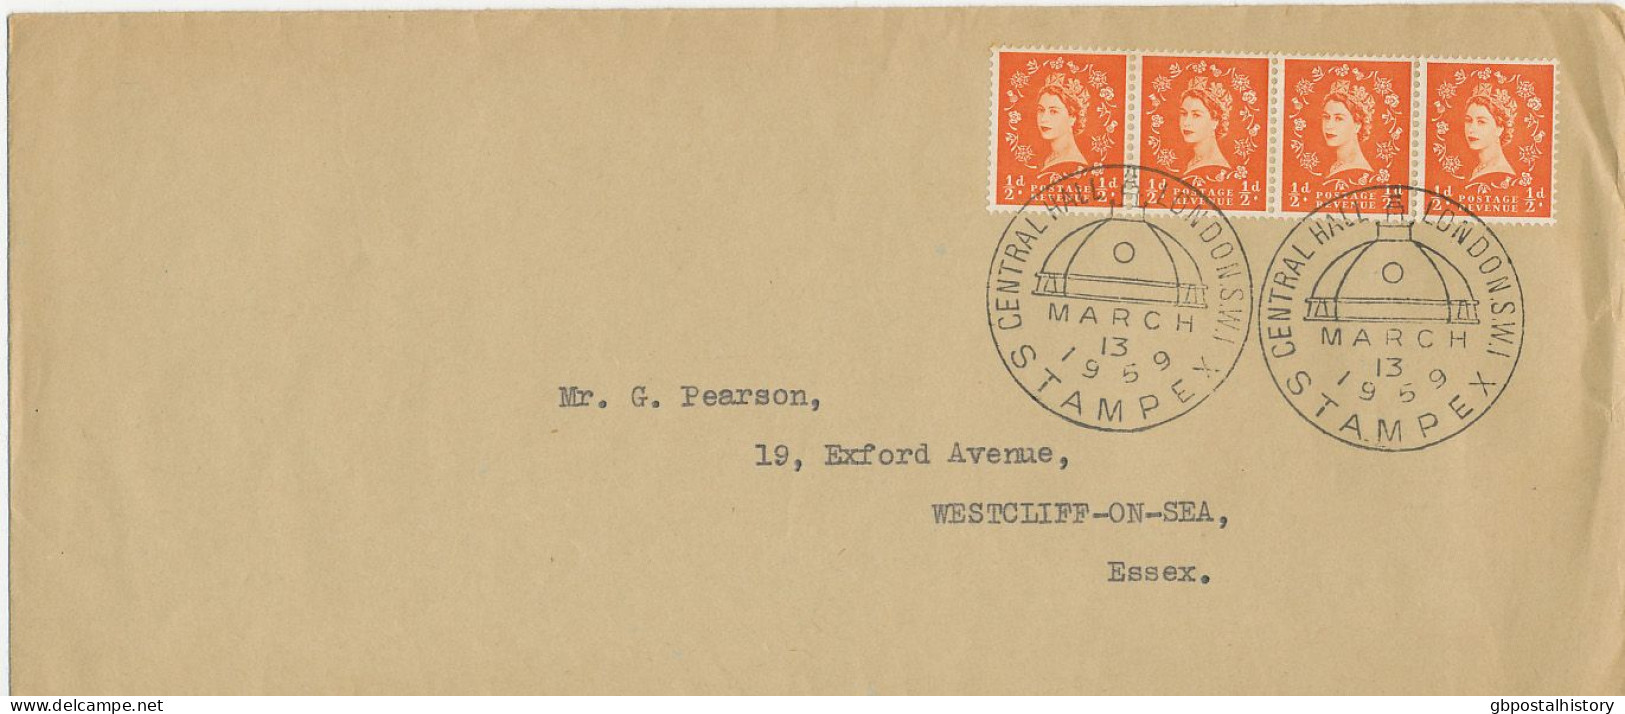 GB SPECIAL EVENT POSTMARKS 1959 STAMPEX CENTRAL HALL LONDON S.W.I. ADDRESSED TO GEORGE PEARSON - Cartas & Documentos